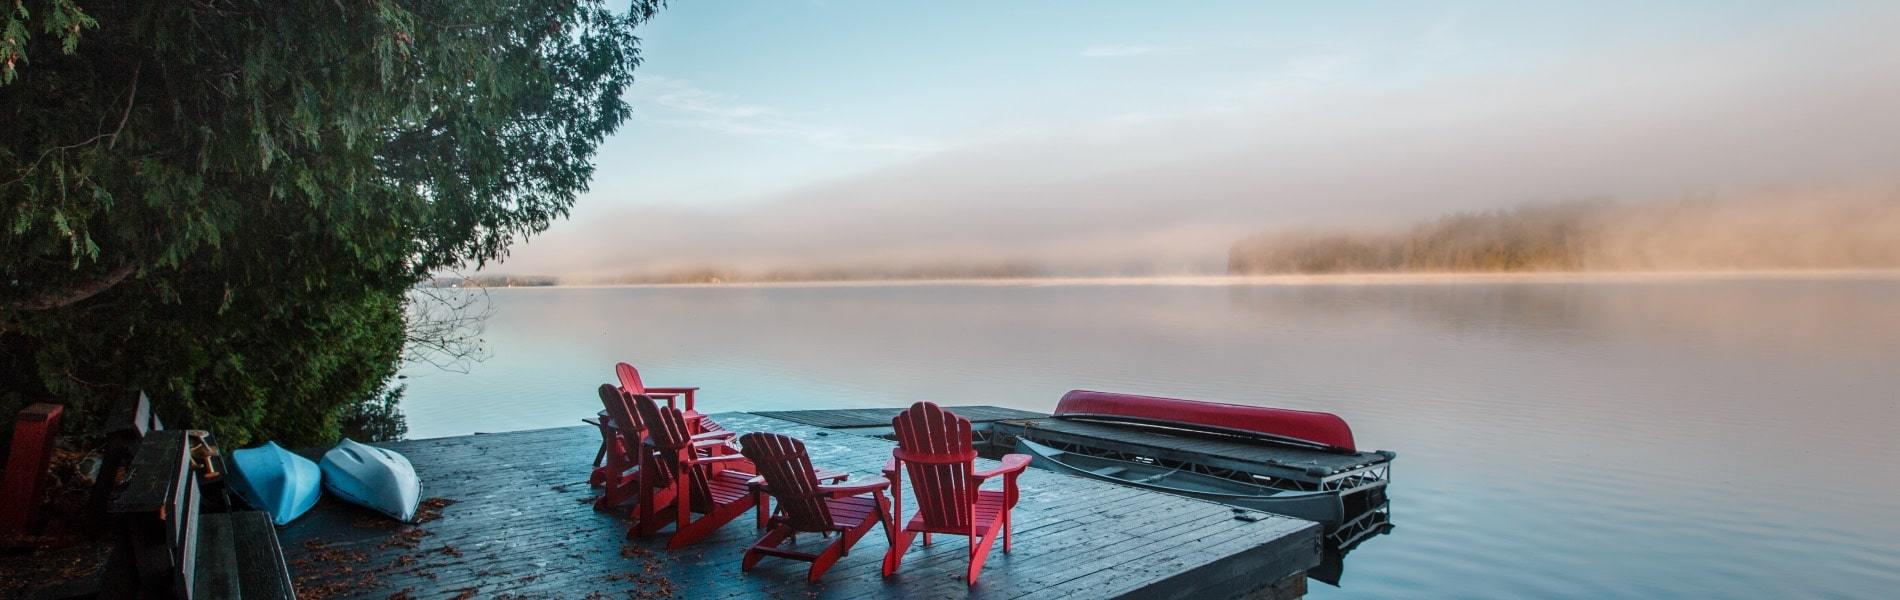 View of chairs overlooking Ontario lake